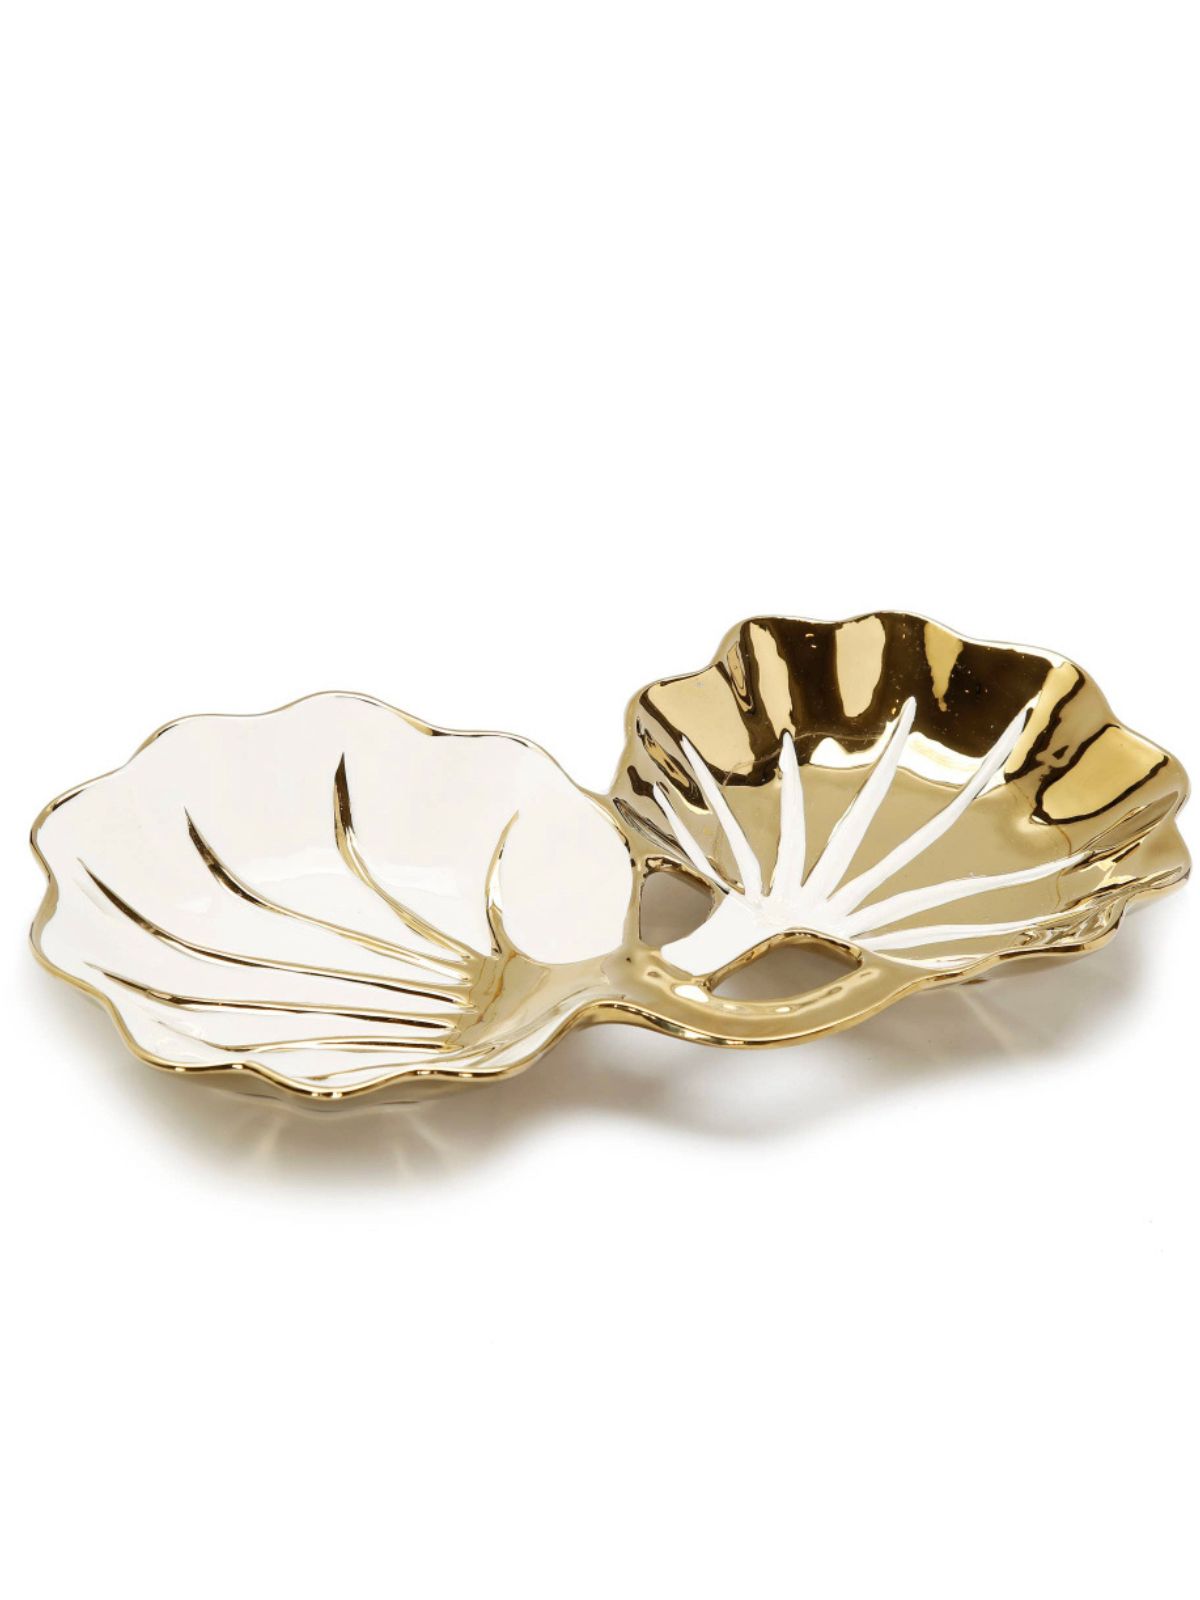 This 2 cluster bowl can be used as a table topper fill them with some chocolate, candies, or confectionaries, or just as a centerpiece bowl decorating your living area. 